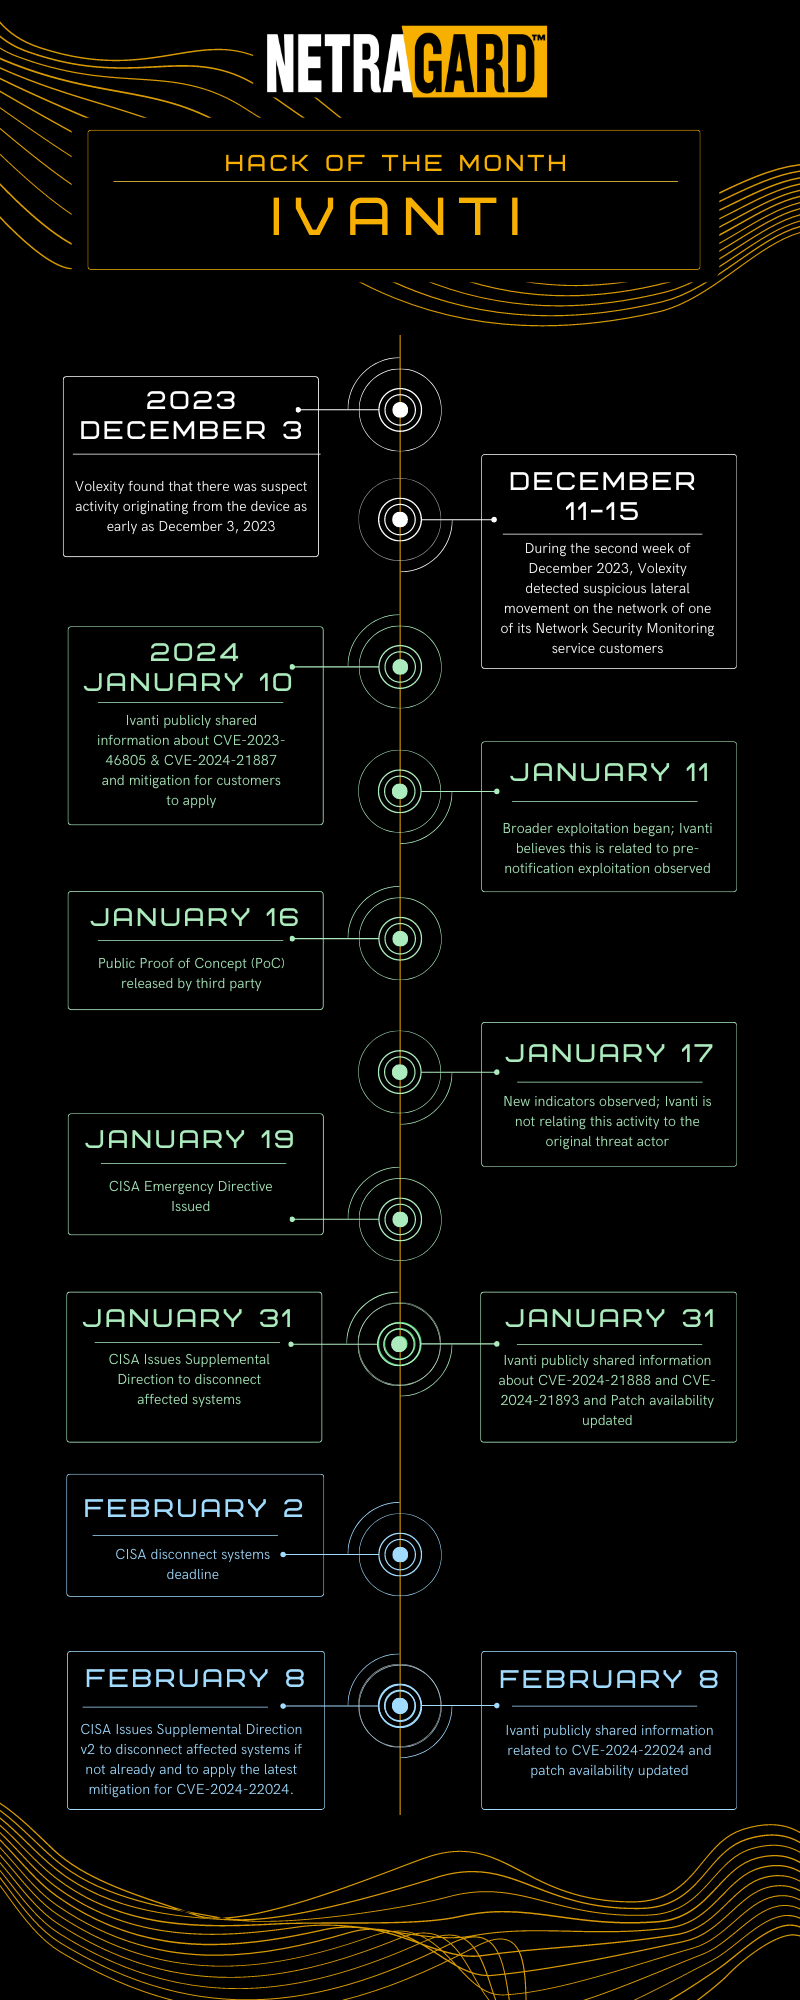 TimeLine: December 3: Volexity found that there was suspect activity originating from the device as early as December 3, 2023 December 11-15: During the second week of December 2023, Volexity detected suspicious lateral movement on the network of one of its Network Security Monitoring service customers January 10: Ivanti publicly shared information about CVE-2023-46805 & CVE-2024-21887 and mitigation for customers to apply January 11: Broader exploitation began; Ivanti believes this is related to pre-notification exploitation observed January 16: Public Proof of Concept (PoC) released by third party January 17: New indicators observed; Ivanti is not relating this activity to the original threat actor January 19: CISA Emergency Directive Issued January 31: Ivanti publicly shared information about CVE-2024-21888 and CVE-2024-21893 an Patch availability updated. January 31: CISA Issues Supplemental Direction to disconnect affected systems February 2: CISA disconnect systems deadline February 8: Updated patch and release information related to CVE-2024-22024 February 8: CISA Issues Supplemental Direction v2 to disconnect affected systems if not already and to apply the latest mitigation for CVE-2024-22024. 